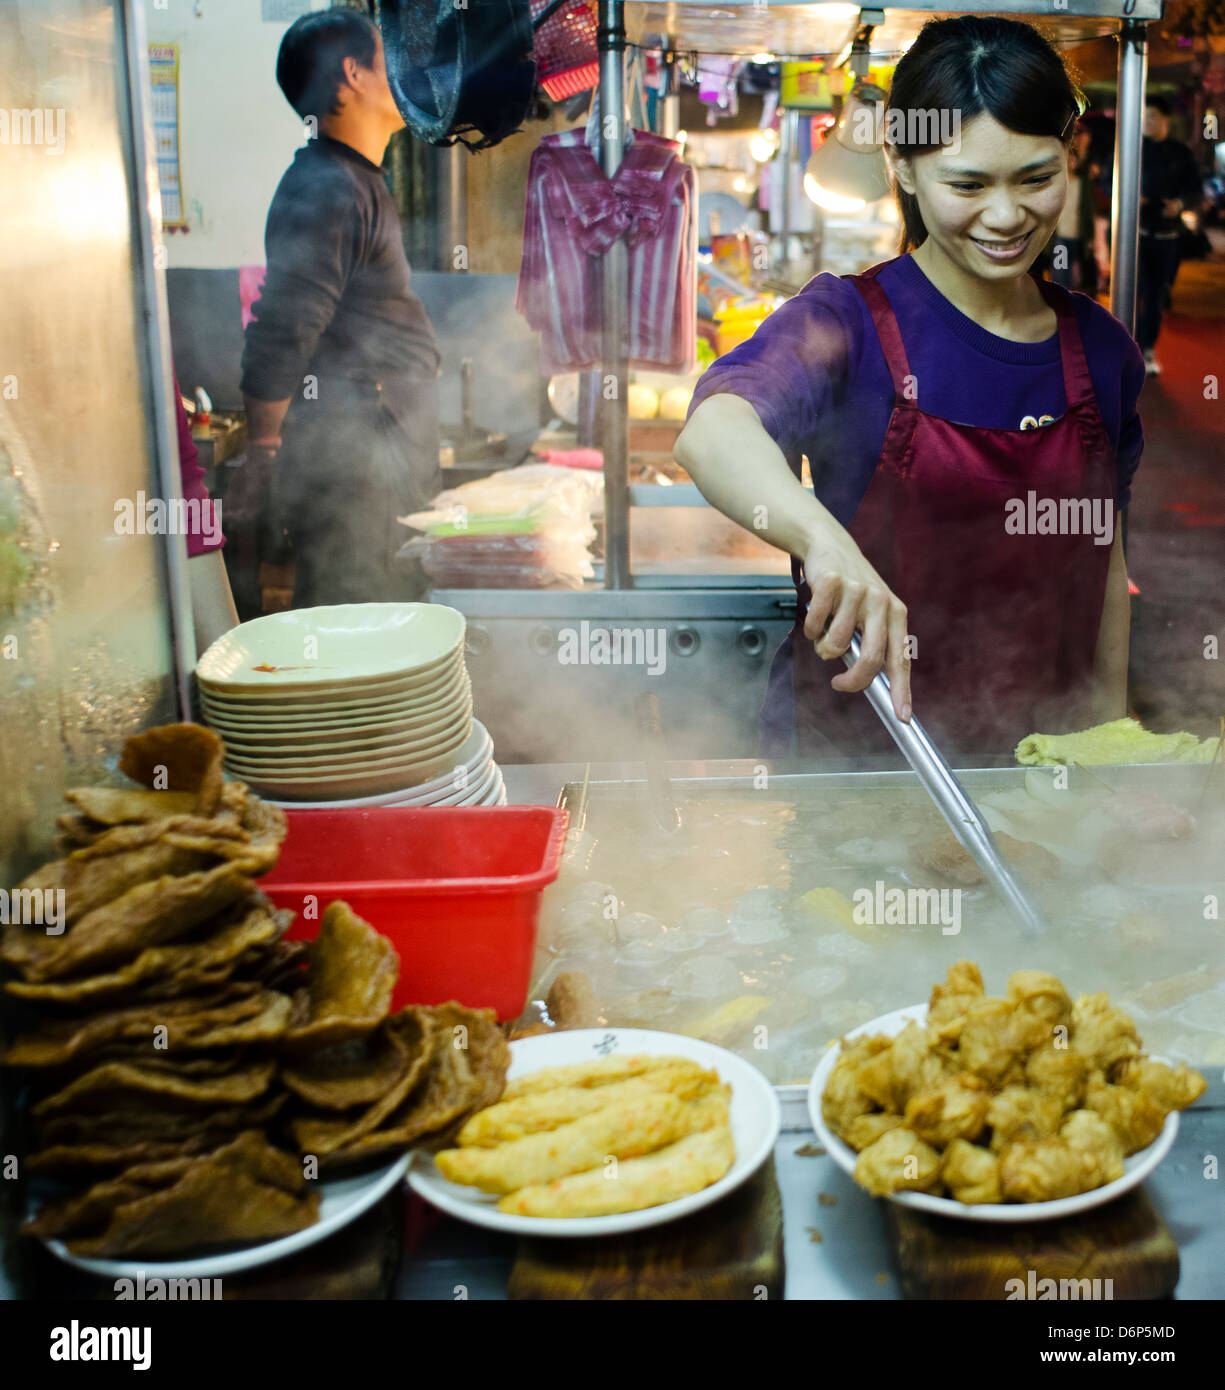 Beautiful girl preparing food at one of many stands on a food market, Taiwan. Stock Photo